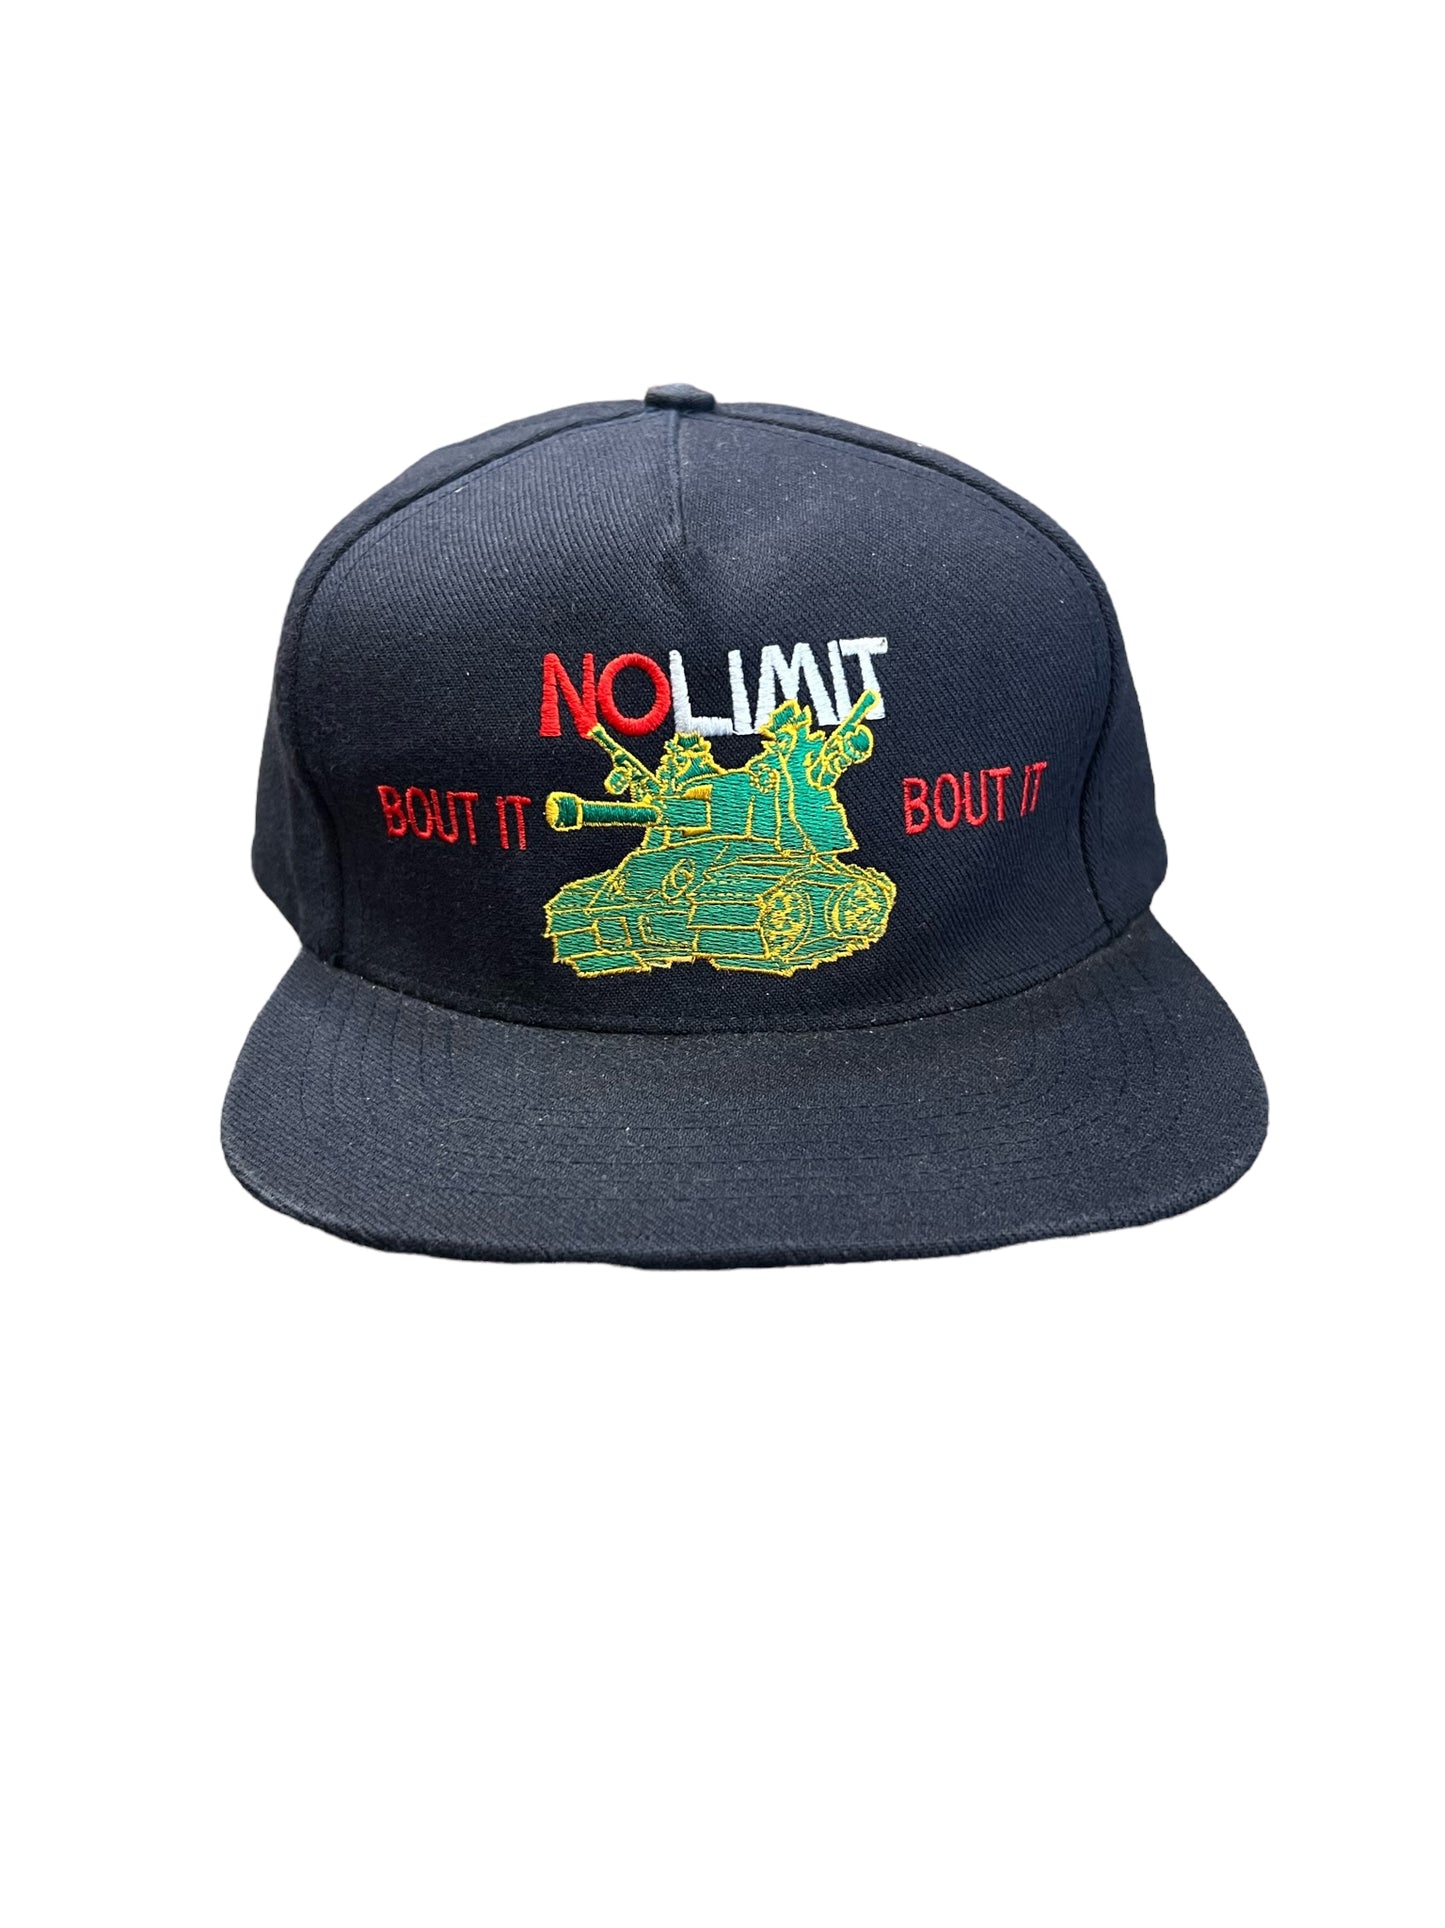 Supreme S/S 2012 No limit bout it bout it Master P snapback OS Pre-owned